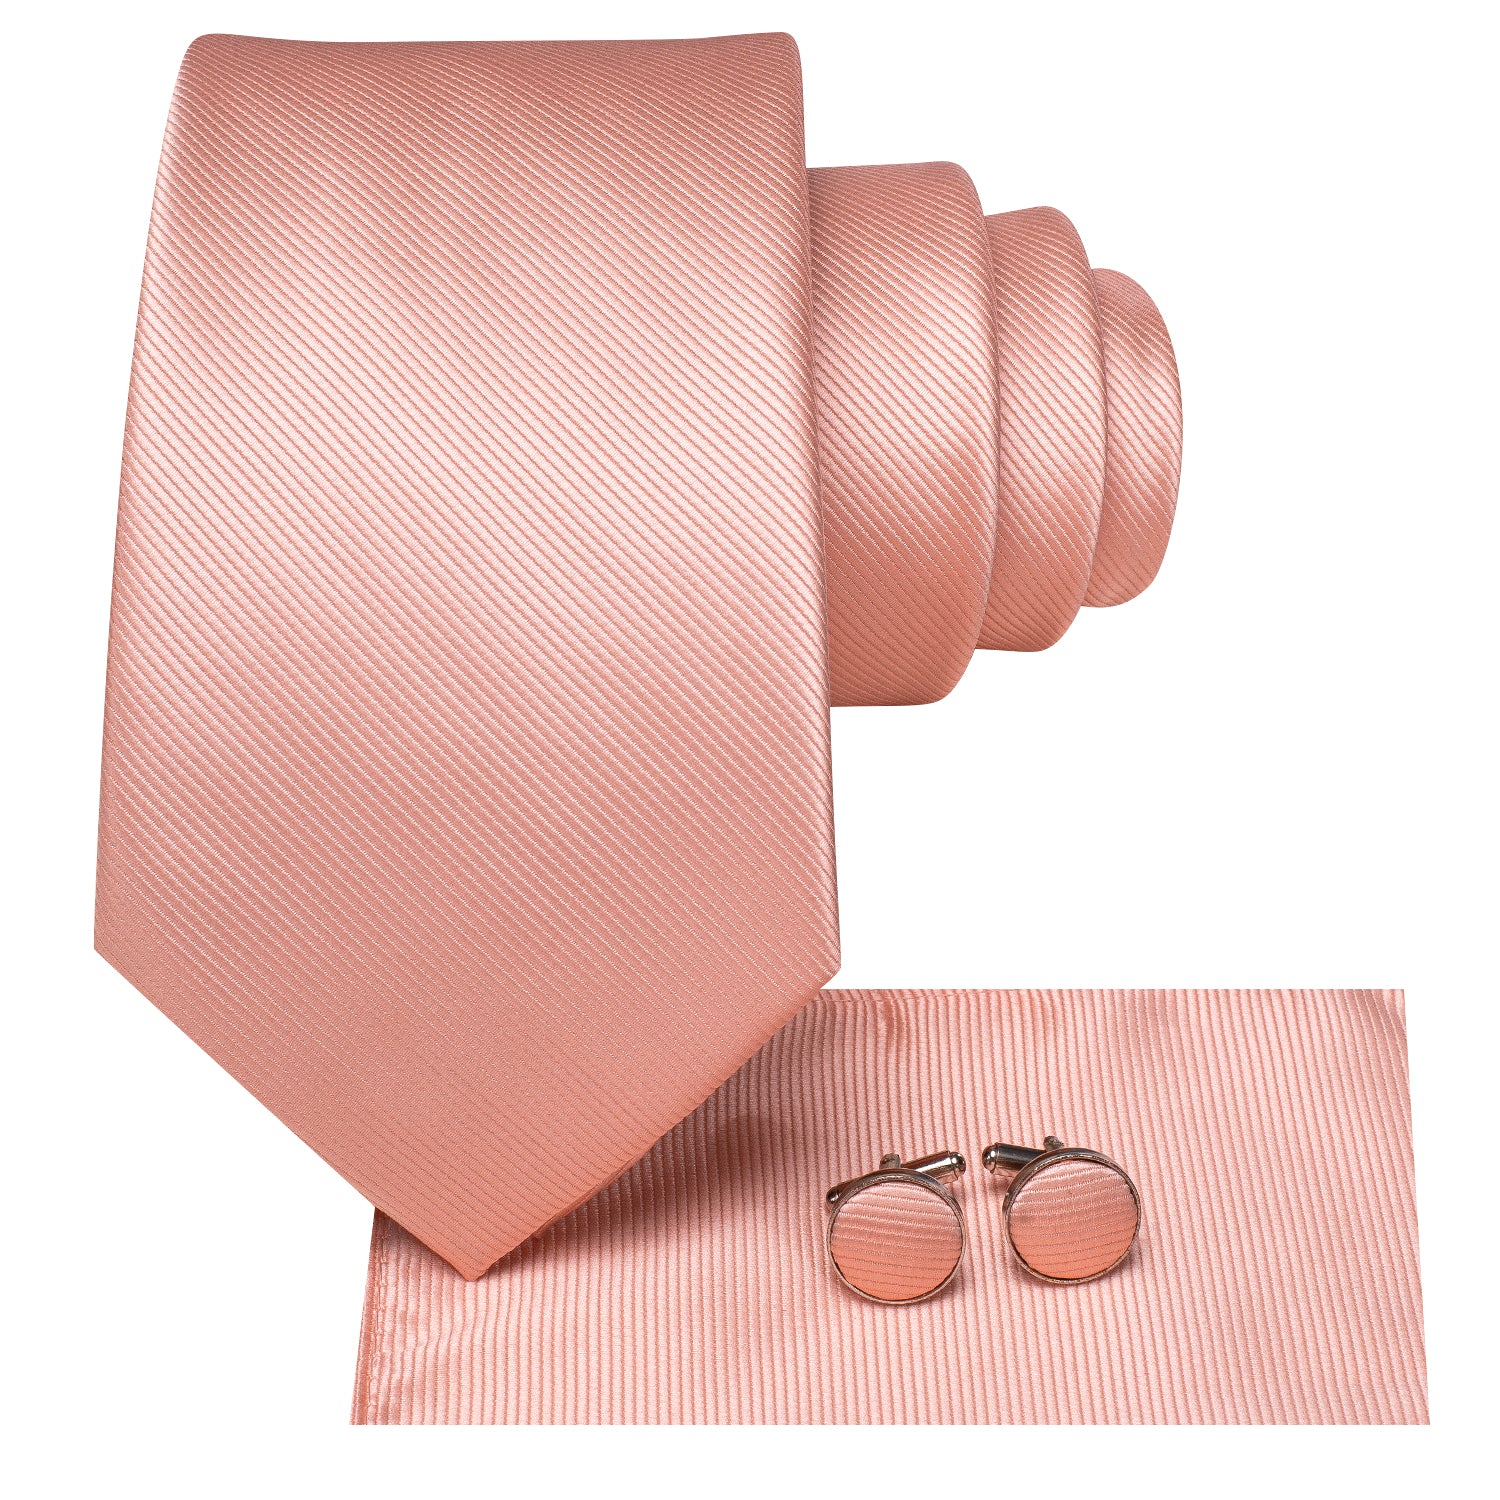 New Coral Pink Solid Tie Pocket Square Cufflinks Set